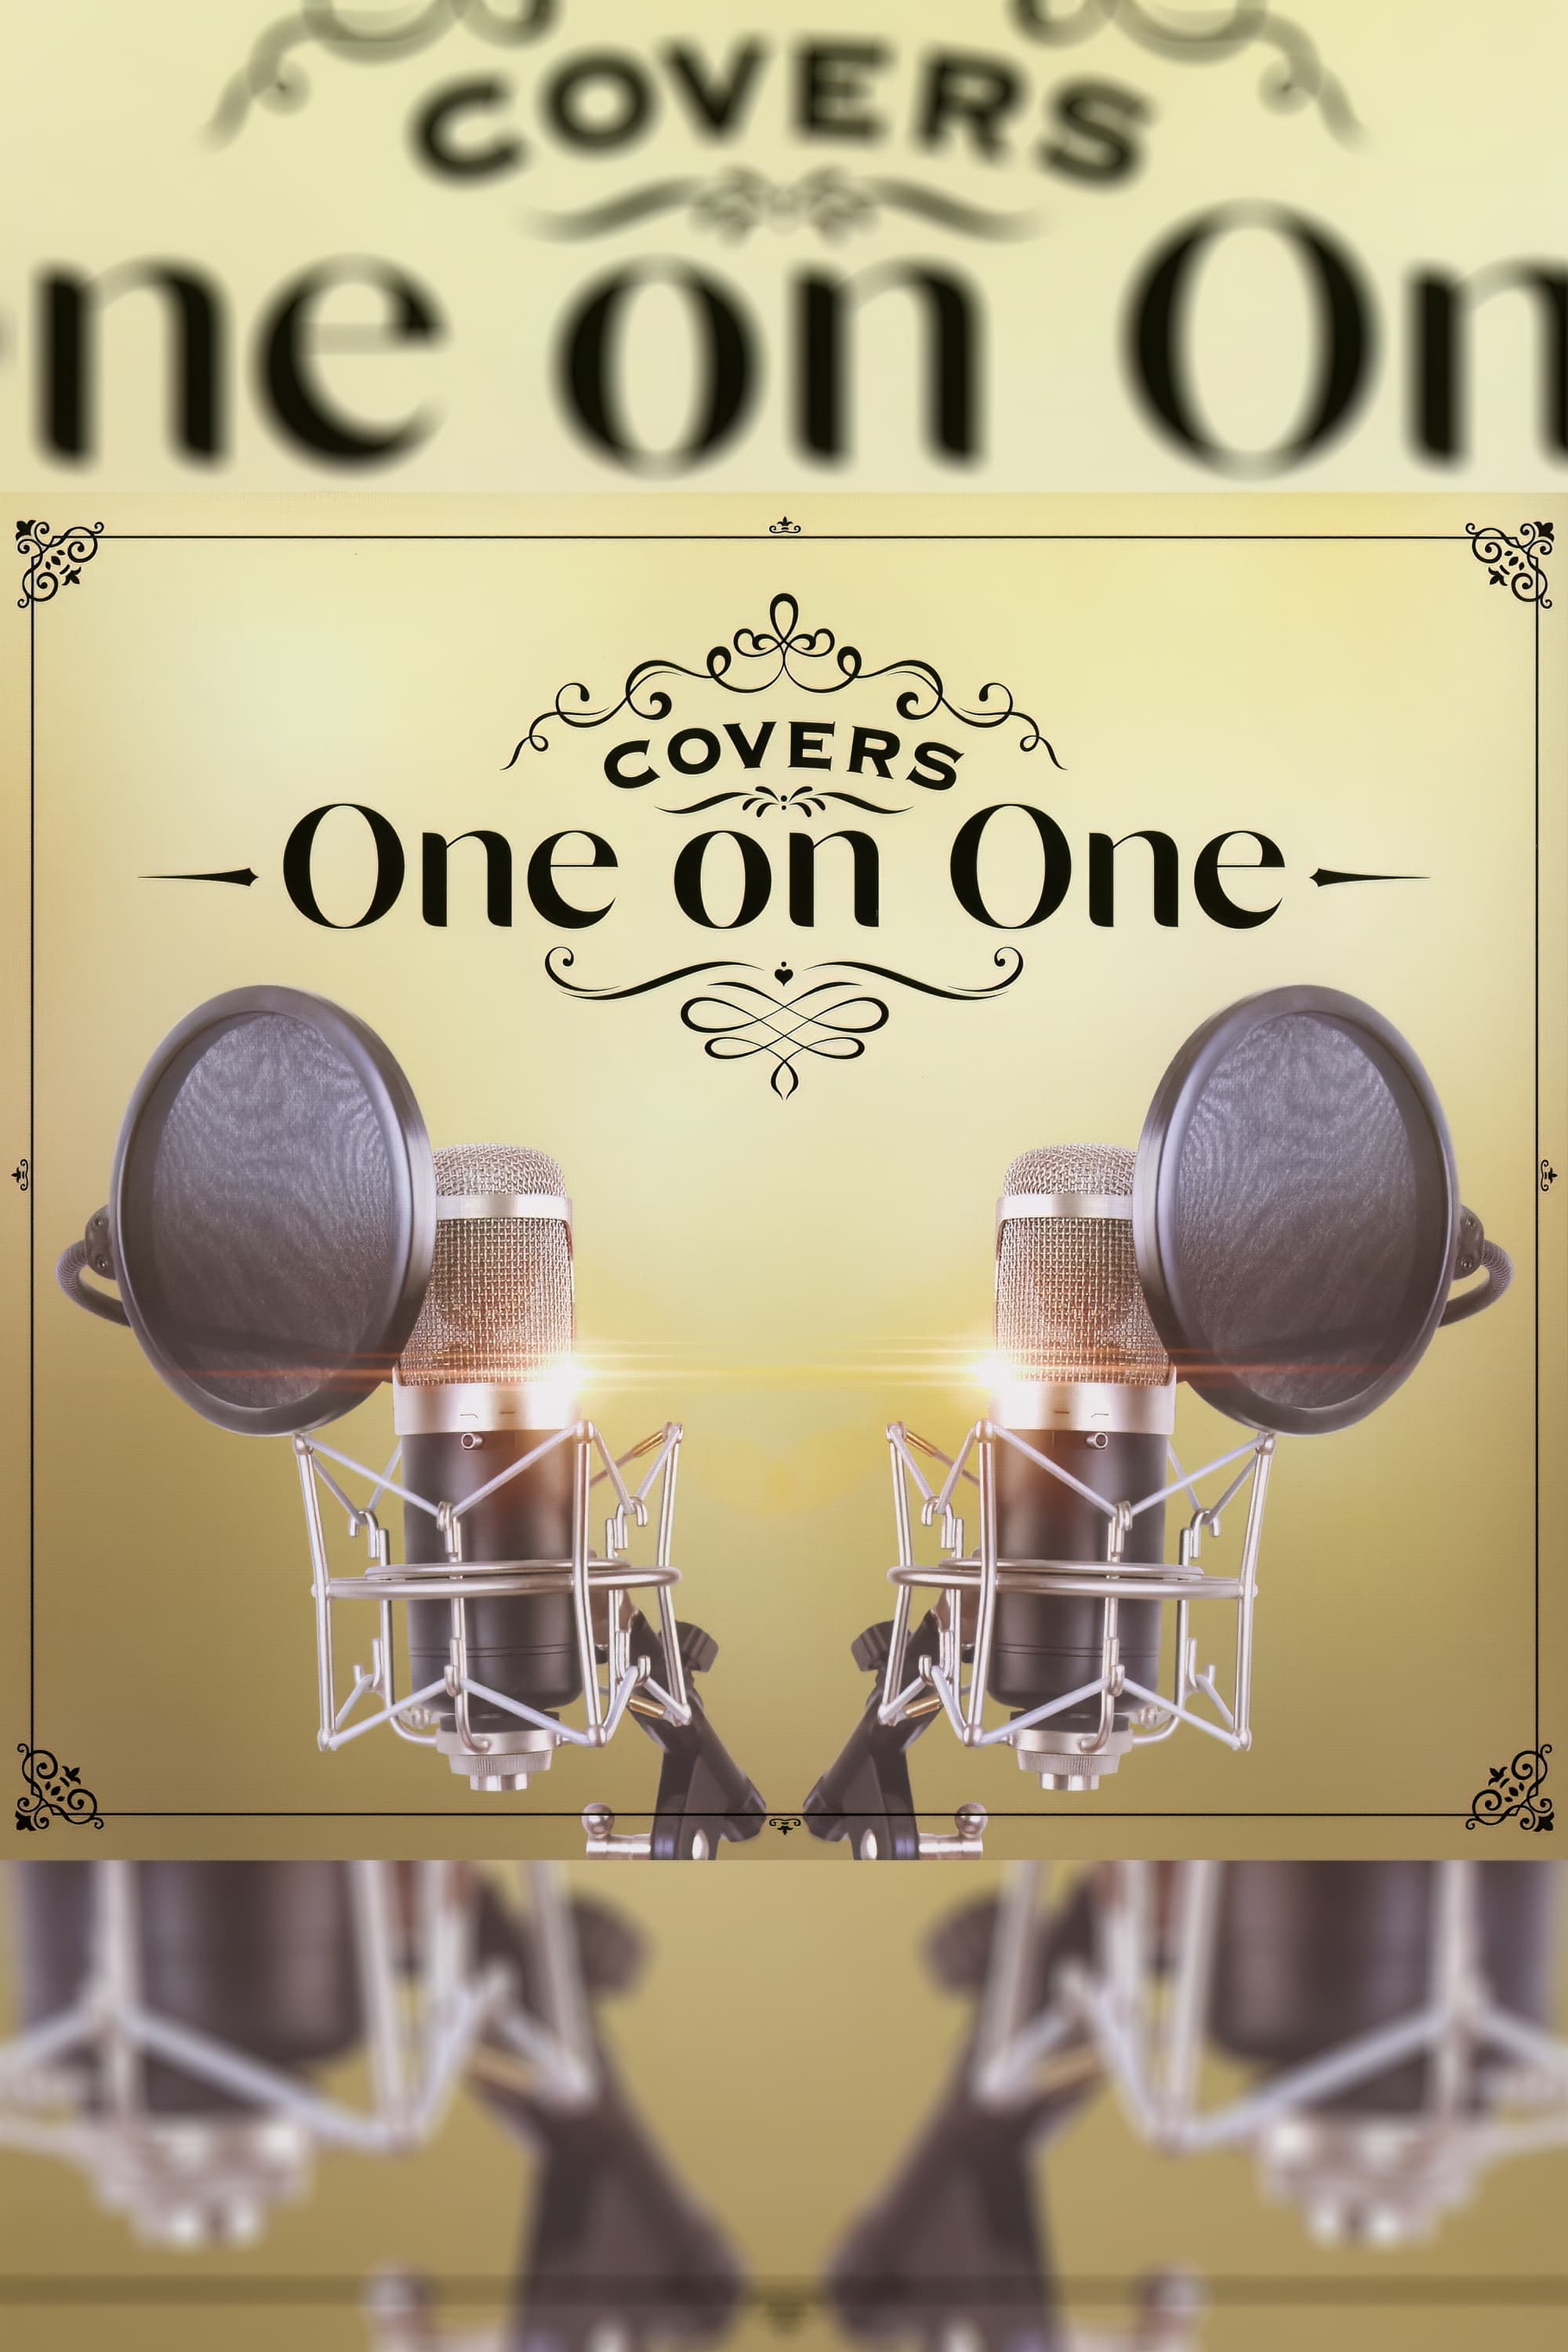 COVERS -One on One-